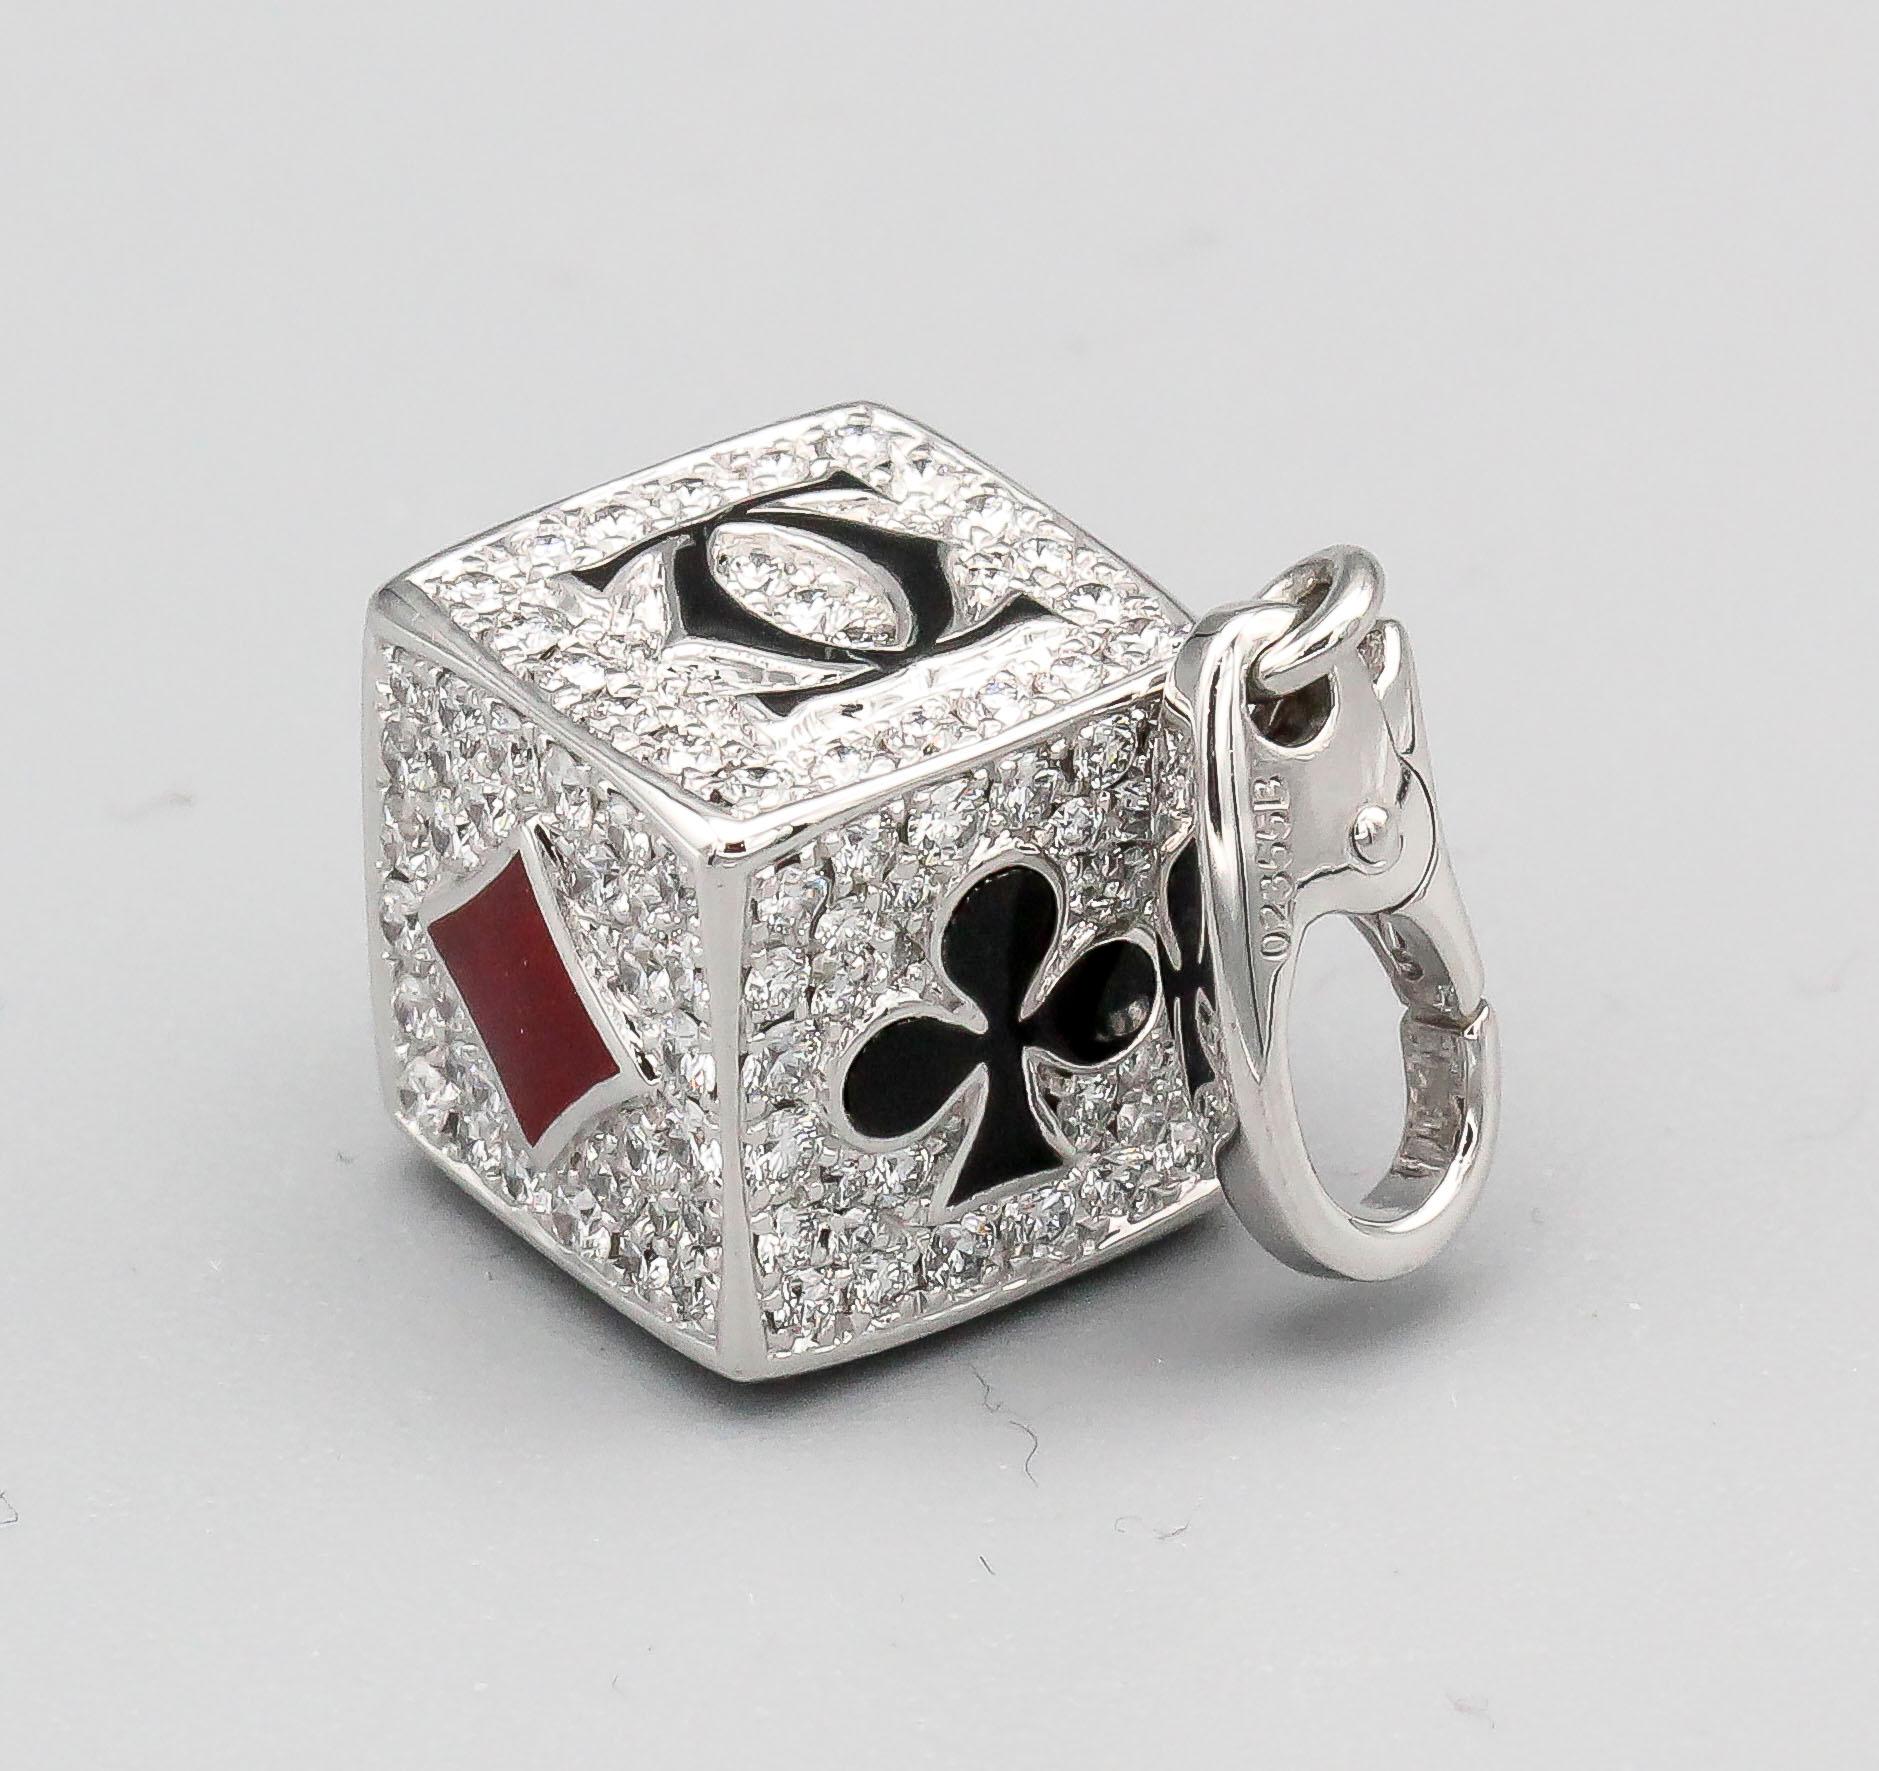 Rare diamond and red and black enamel limited edition (#47 of 70 produced) charm by Cartier. It features high grade round brilliant cut diamonds throughout every side of the square, with playing card suites dressed with red or black enamel, along